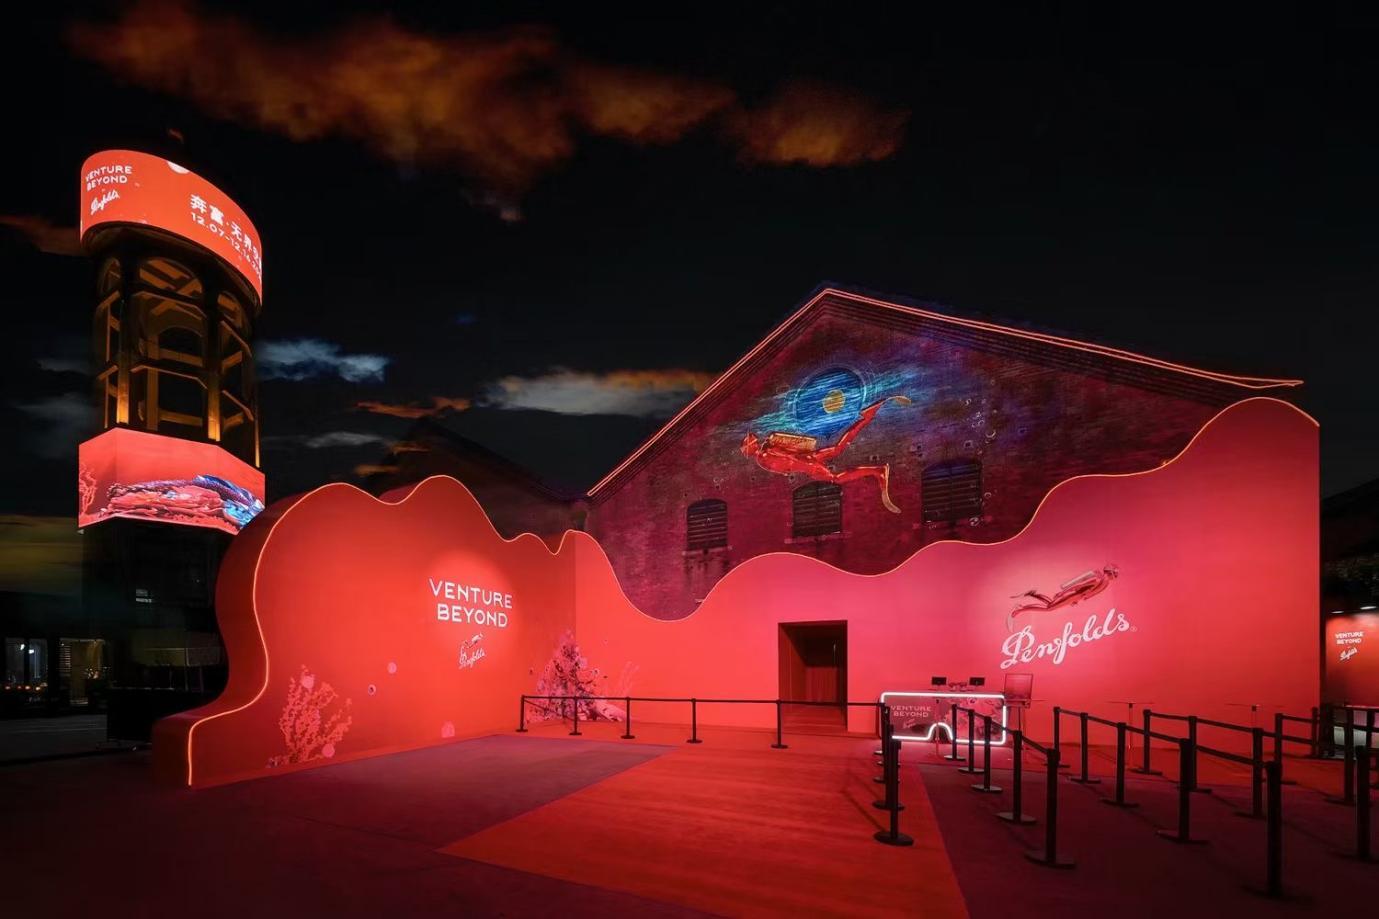 Penfolds brings ‘Venture Beyond’ wine experience to Guangzhou